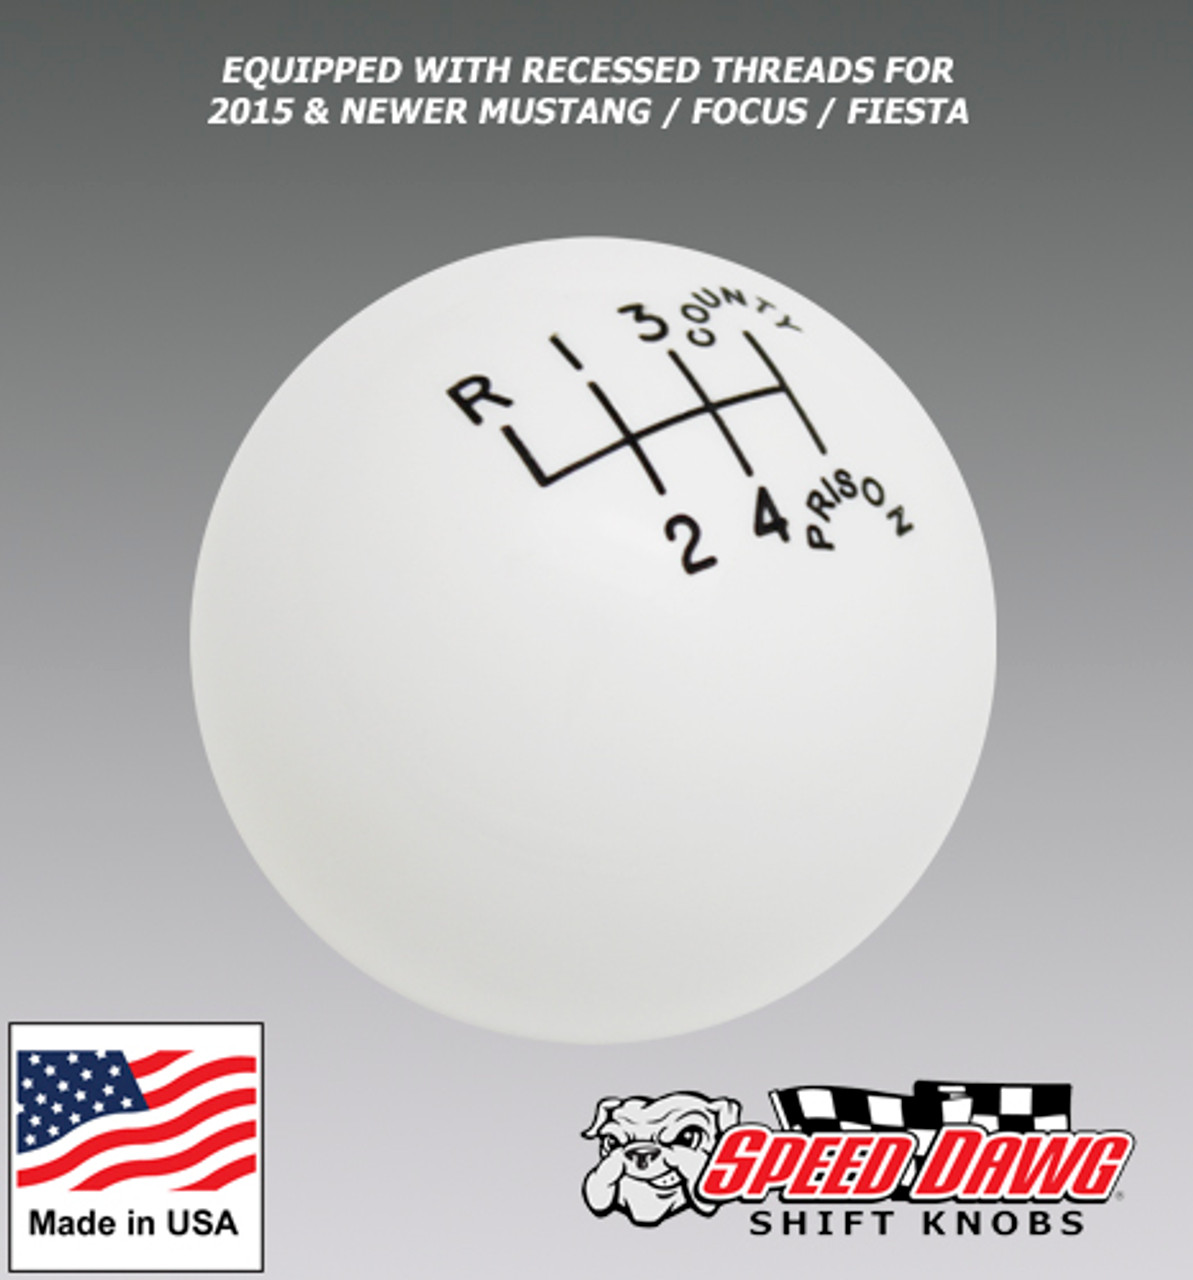 County Prison White 6 Speed Shift Knob for 2015 & Newer Mustang Focus Fiesta